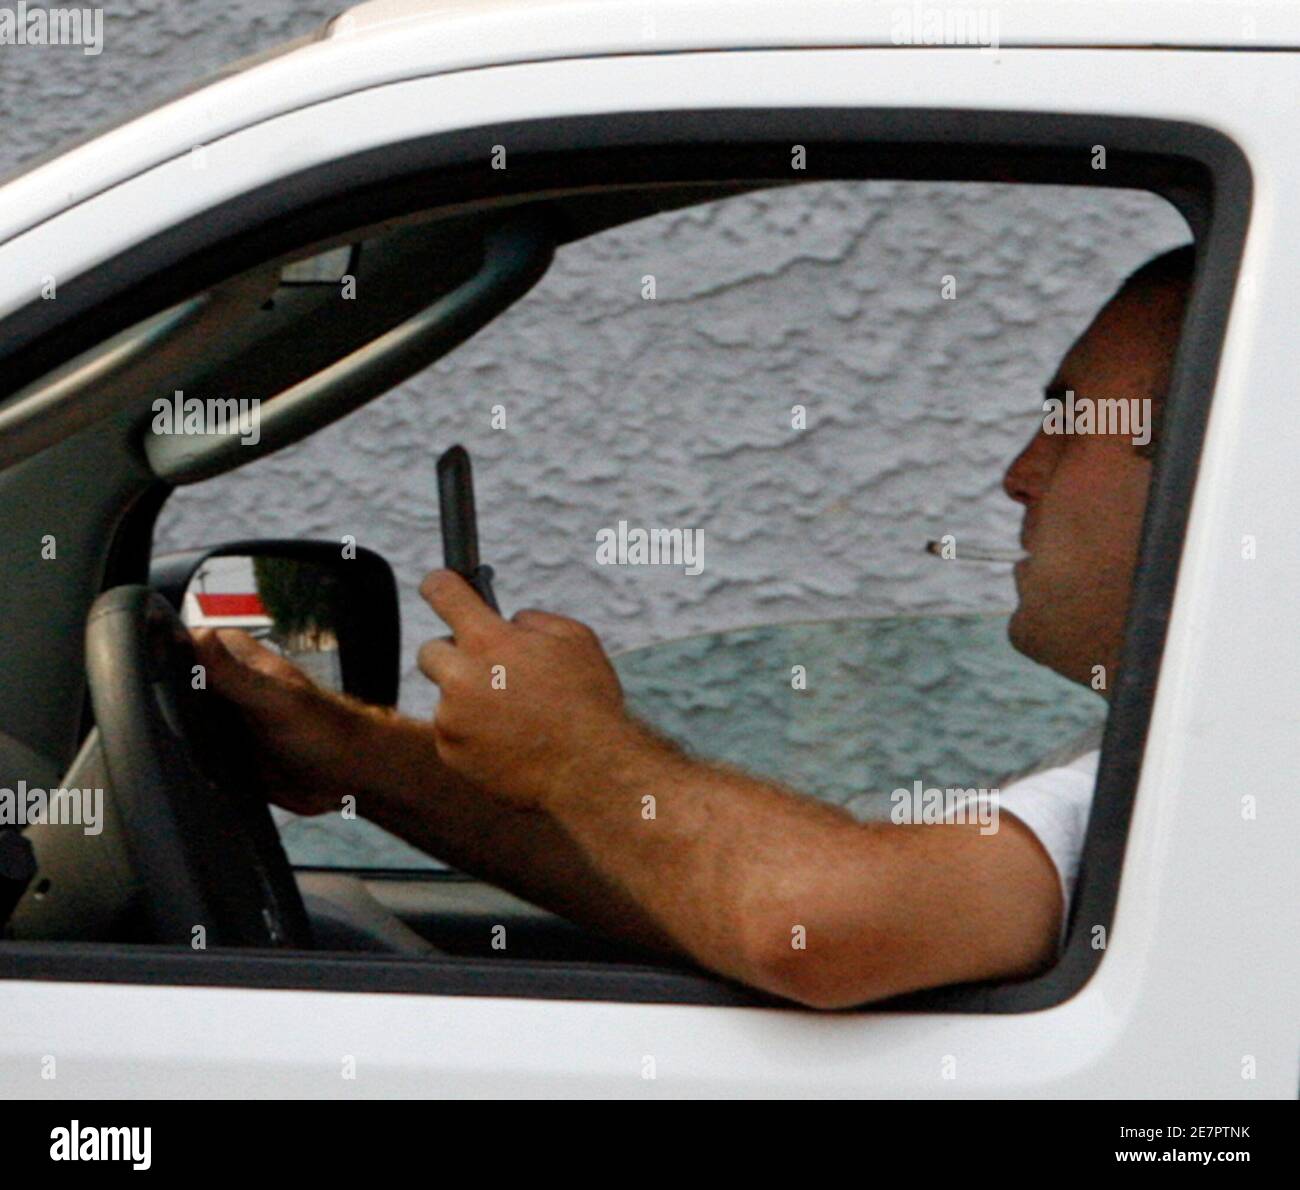 A man uses a cell phone while driving in Burbank, California June 25, 2008. California has a new law which goes into effect July 1 that requires drivers to use a hands-free device while talking on cell phones while driving or face a fine. Picture taken June 25, 2008. To match feature CALIFORNIA-CELLPHONES/  REUTERS/Fred Prouser (UNITED STATES) Stock Photo